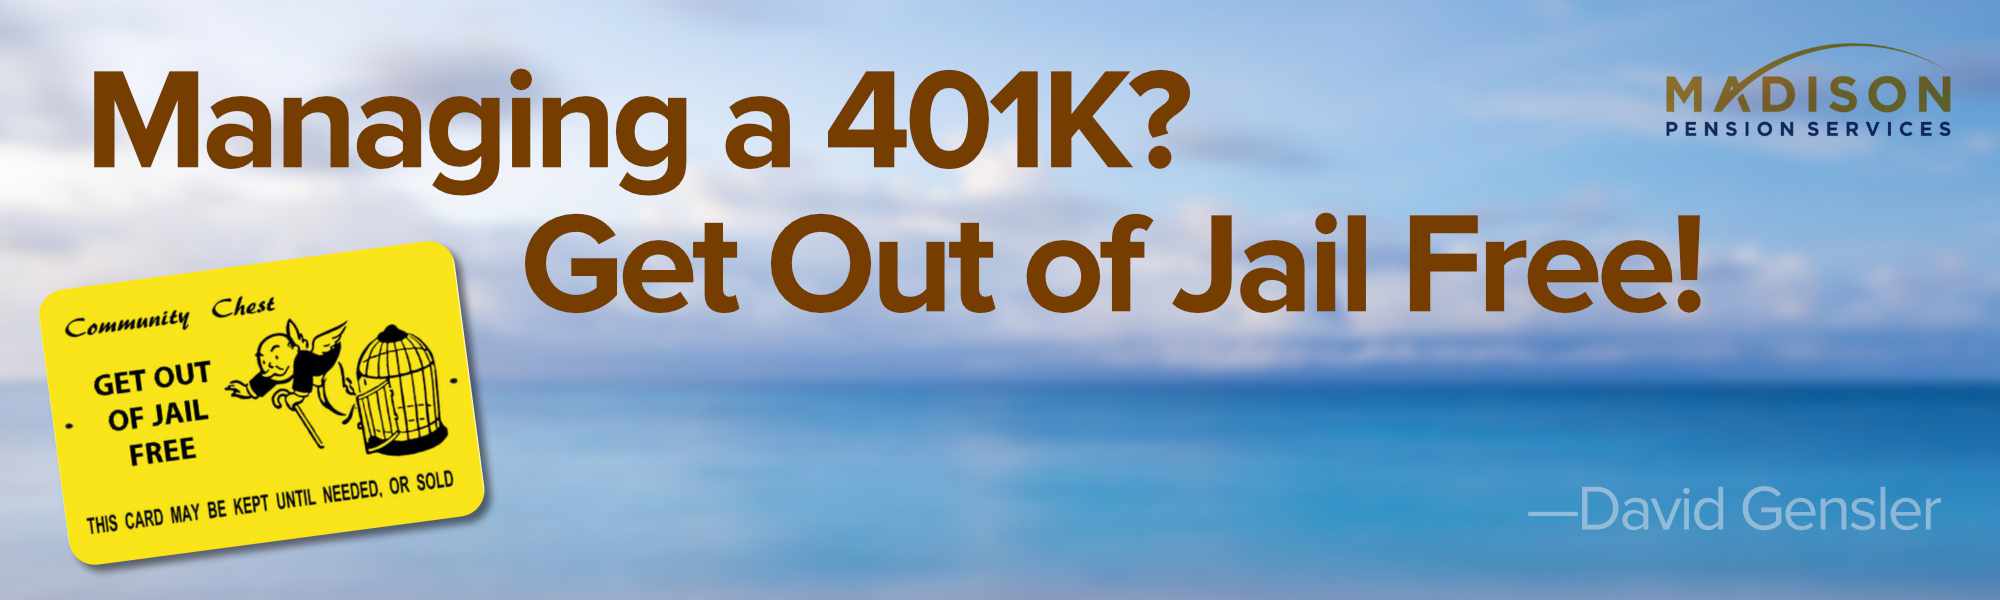 Managing a 401K? Get Out of Jail Free!